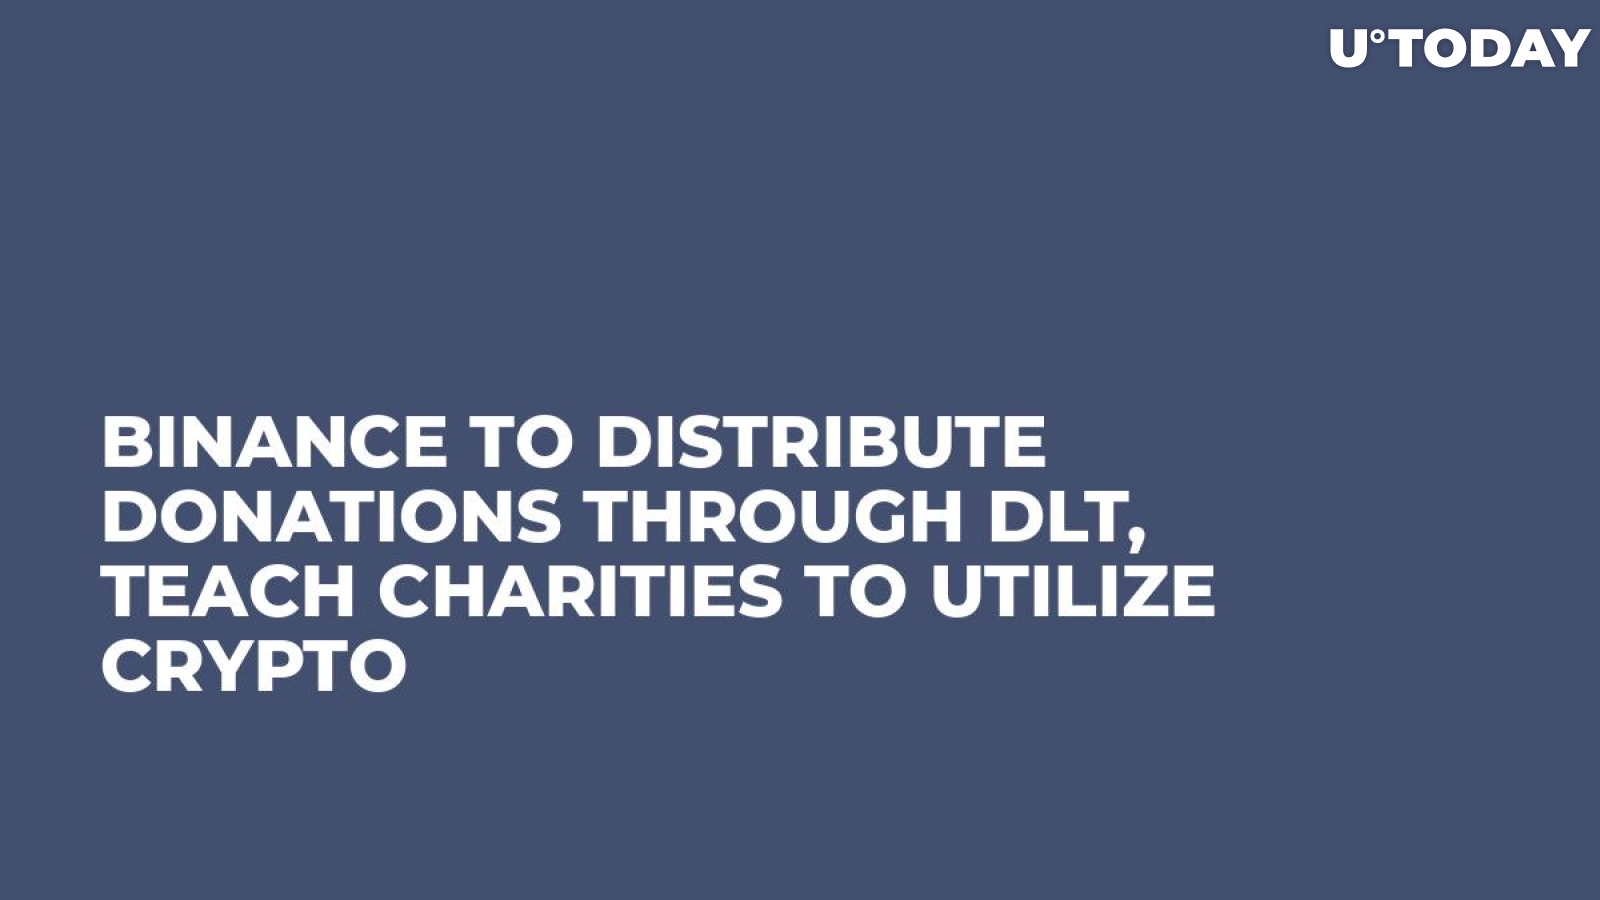 Binance to Distribute Donations Through DLT, Teach Charities to Utilize Crypto